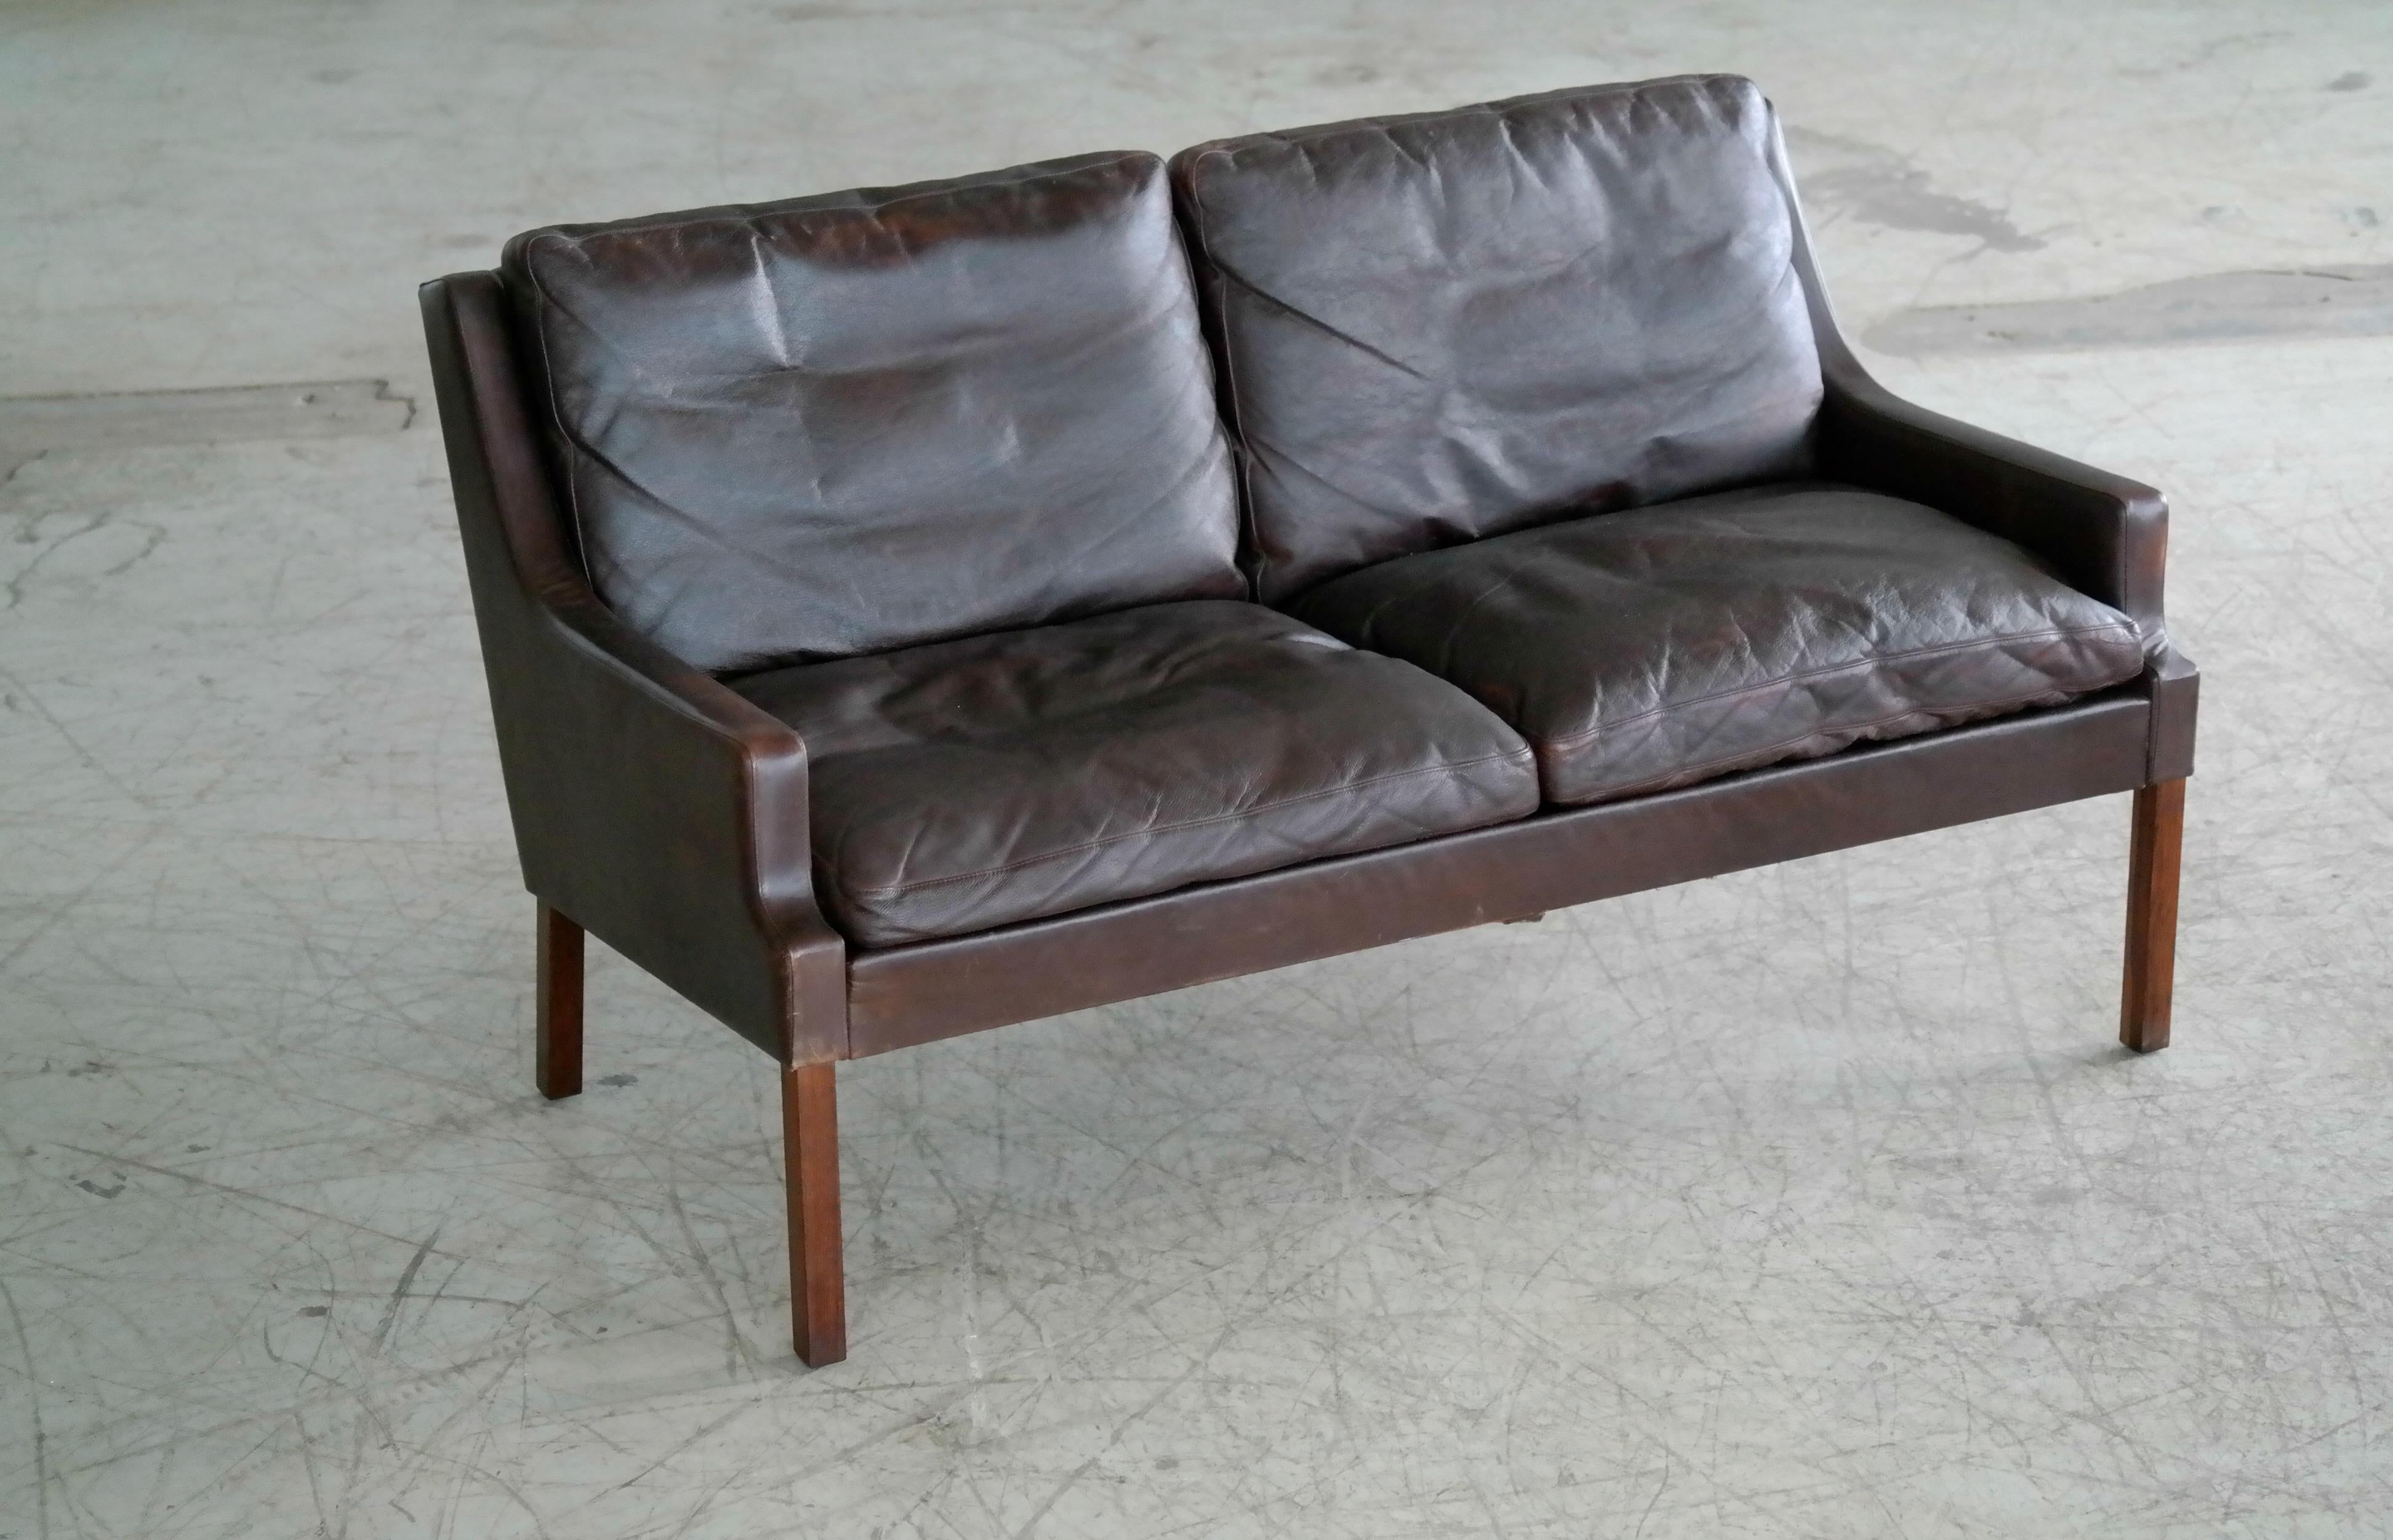 Classic Danish midcentury sofa by Georg Thams from the late 1960s. Slim beautiful silhouette similar to Hans Olsen's iconic designs raised on tall rosewood legs and with down filled cushions wrapped in espresso colored leather. Great patina and wear